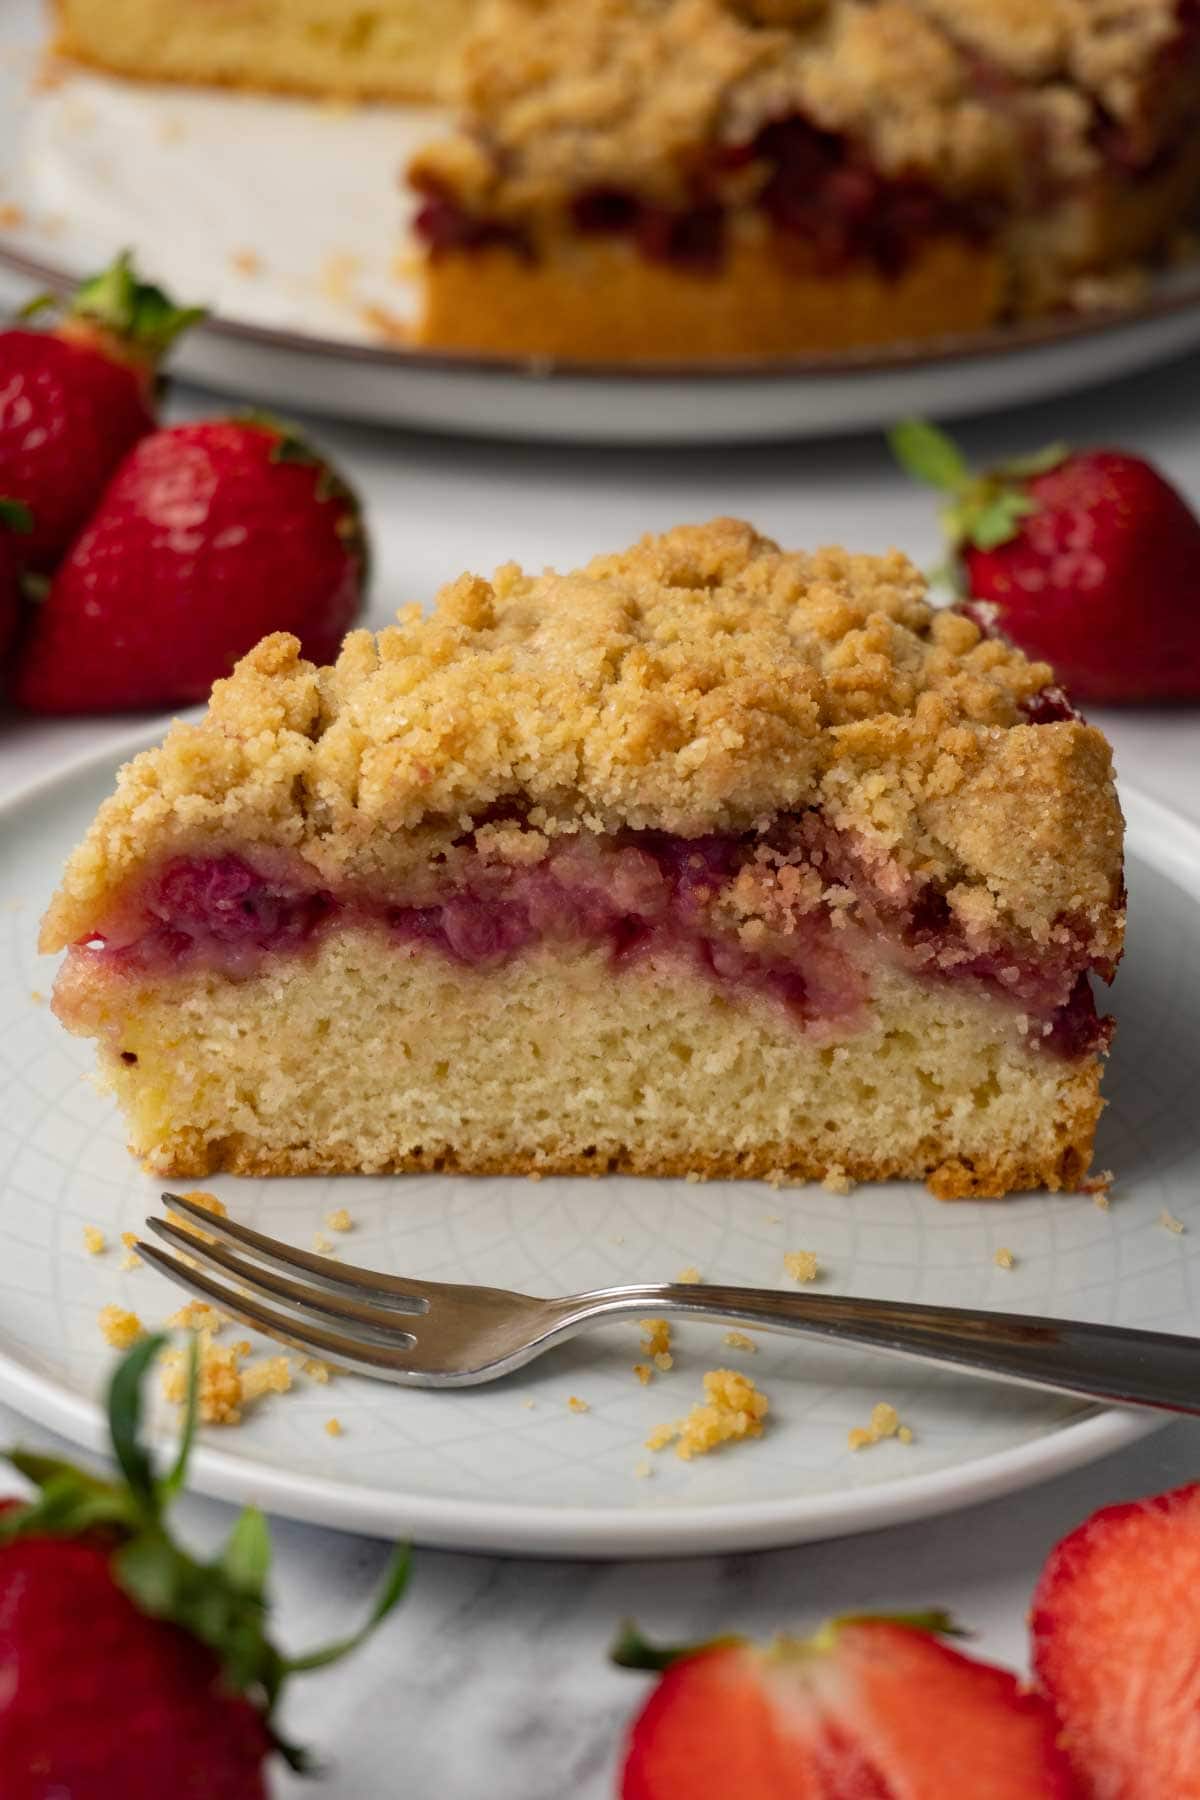 A piece of strawberry cake with crumble topping on a round plate; fresh strawberries are lying around the plate.